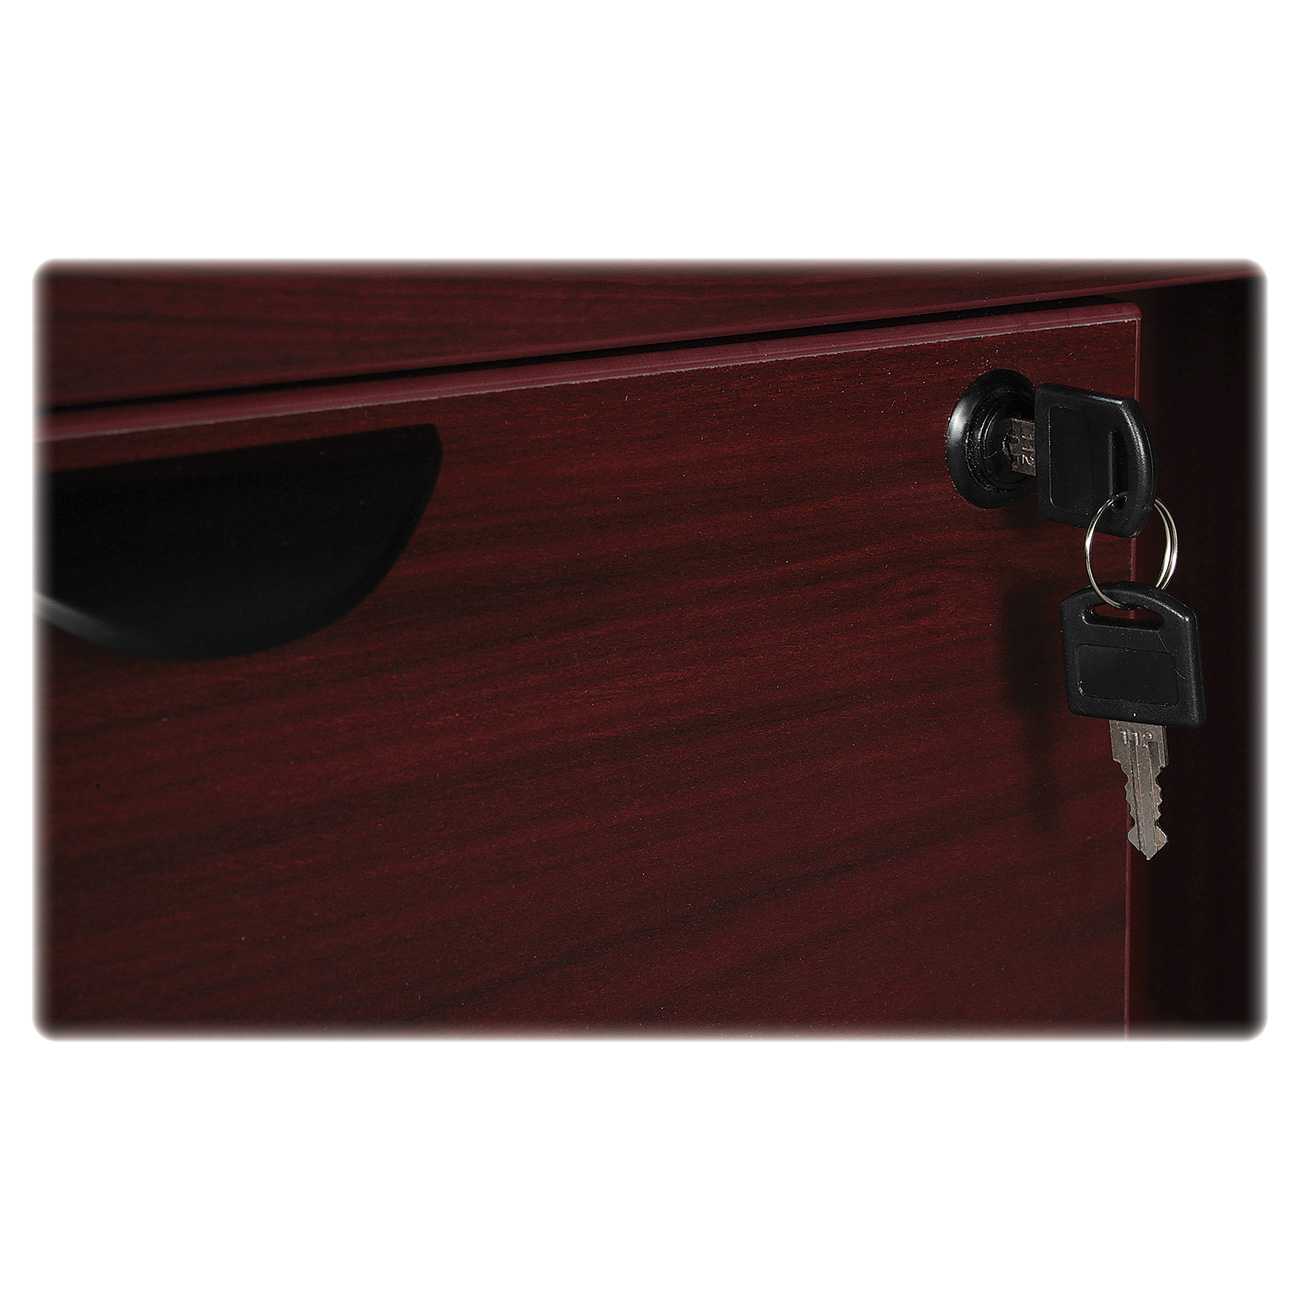 Lorell Prominence 2.0 Mahogany Laminate Lateral File - 2-Drawer 36" x 22" x 29" - 2 x File Drawer(s) - Band Edge - Material: Particleboard - Finish: Mahogany Laminate, Thermofused Melamine (TFM) - image 4 of 15